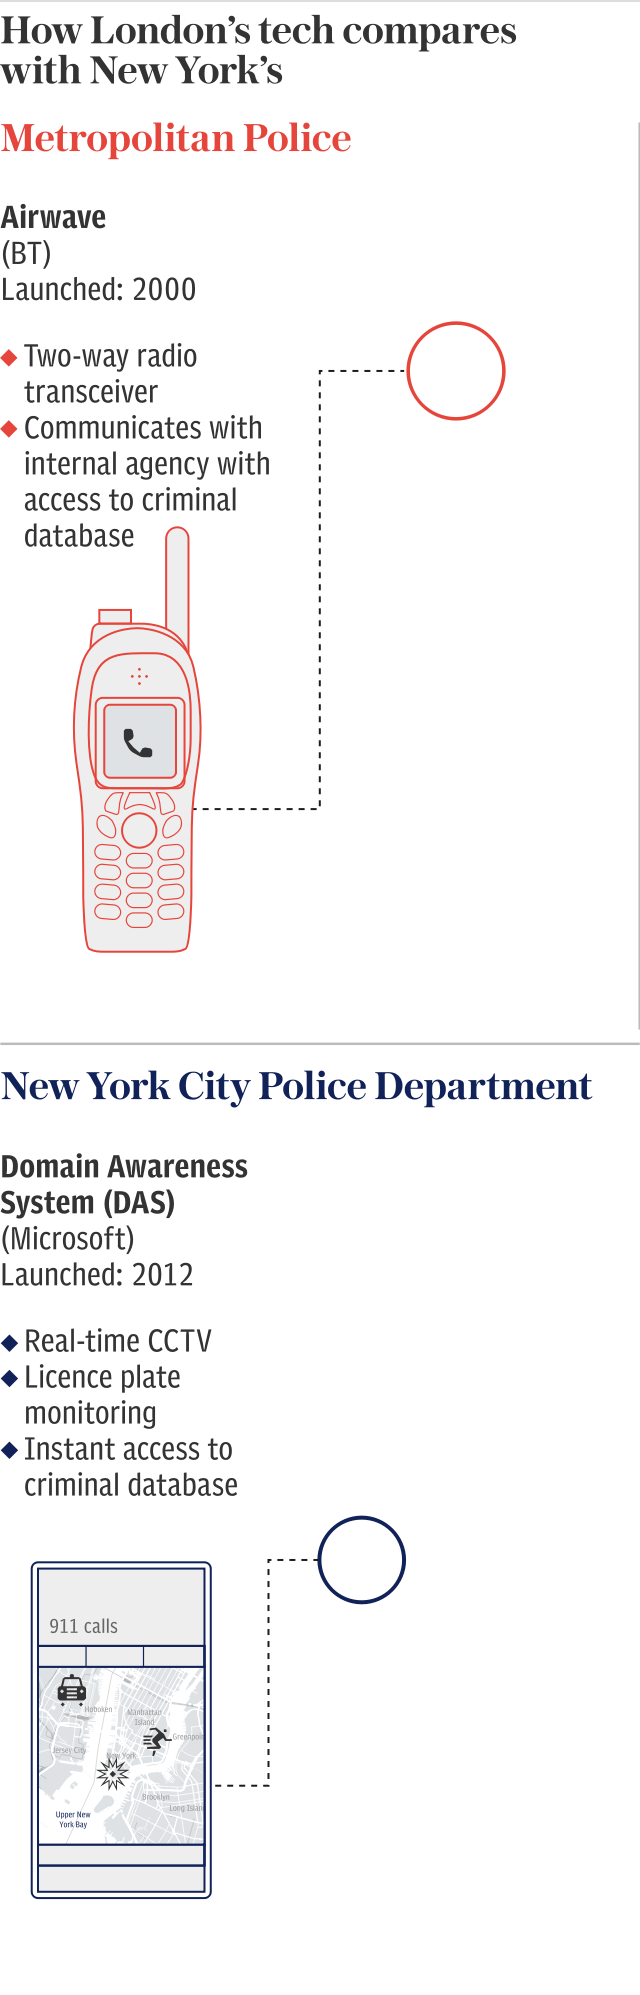 London's police compared with New York